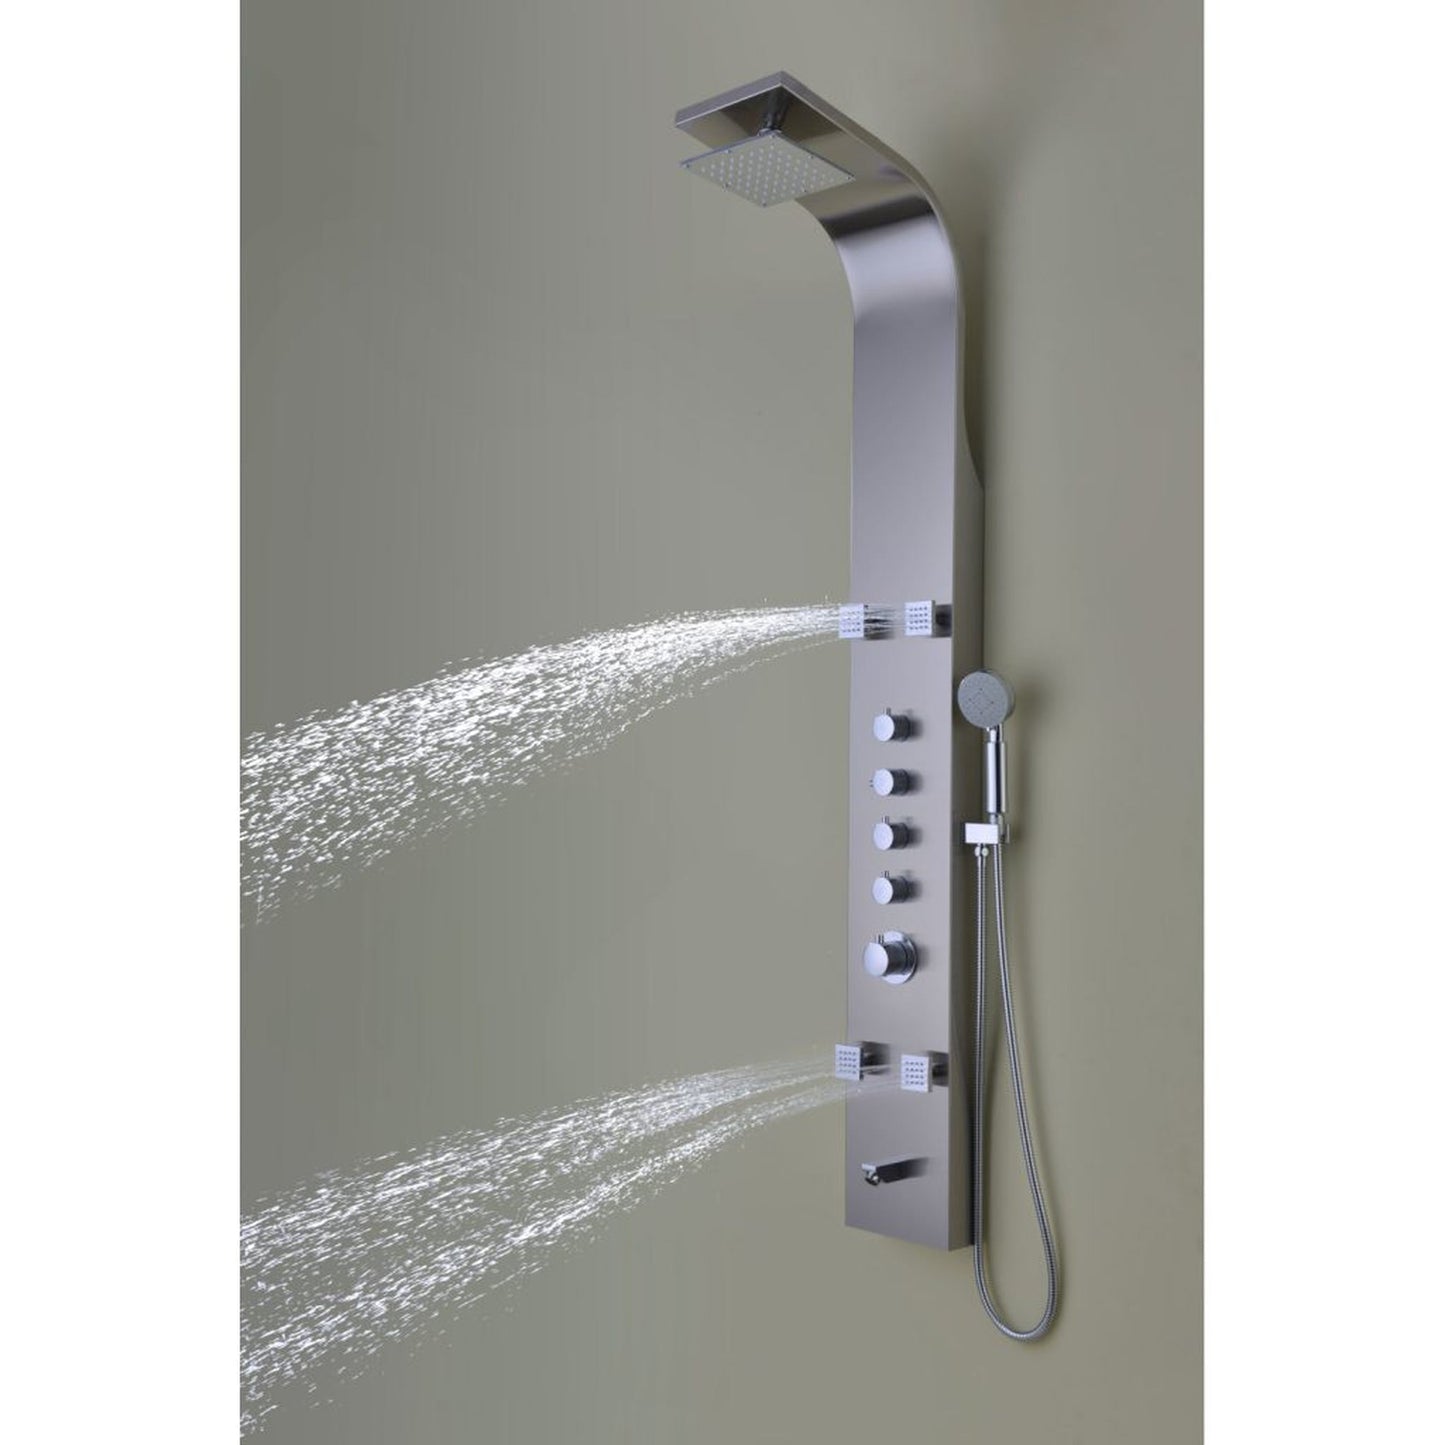 ANZZI Echo Series 63.5" Brushed Stainless Steel 4-Jetted Full Body Shower Panel With Heavy Rain Shower Head and Euro-Grip Hand Sprayer